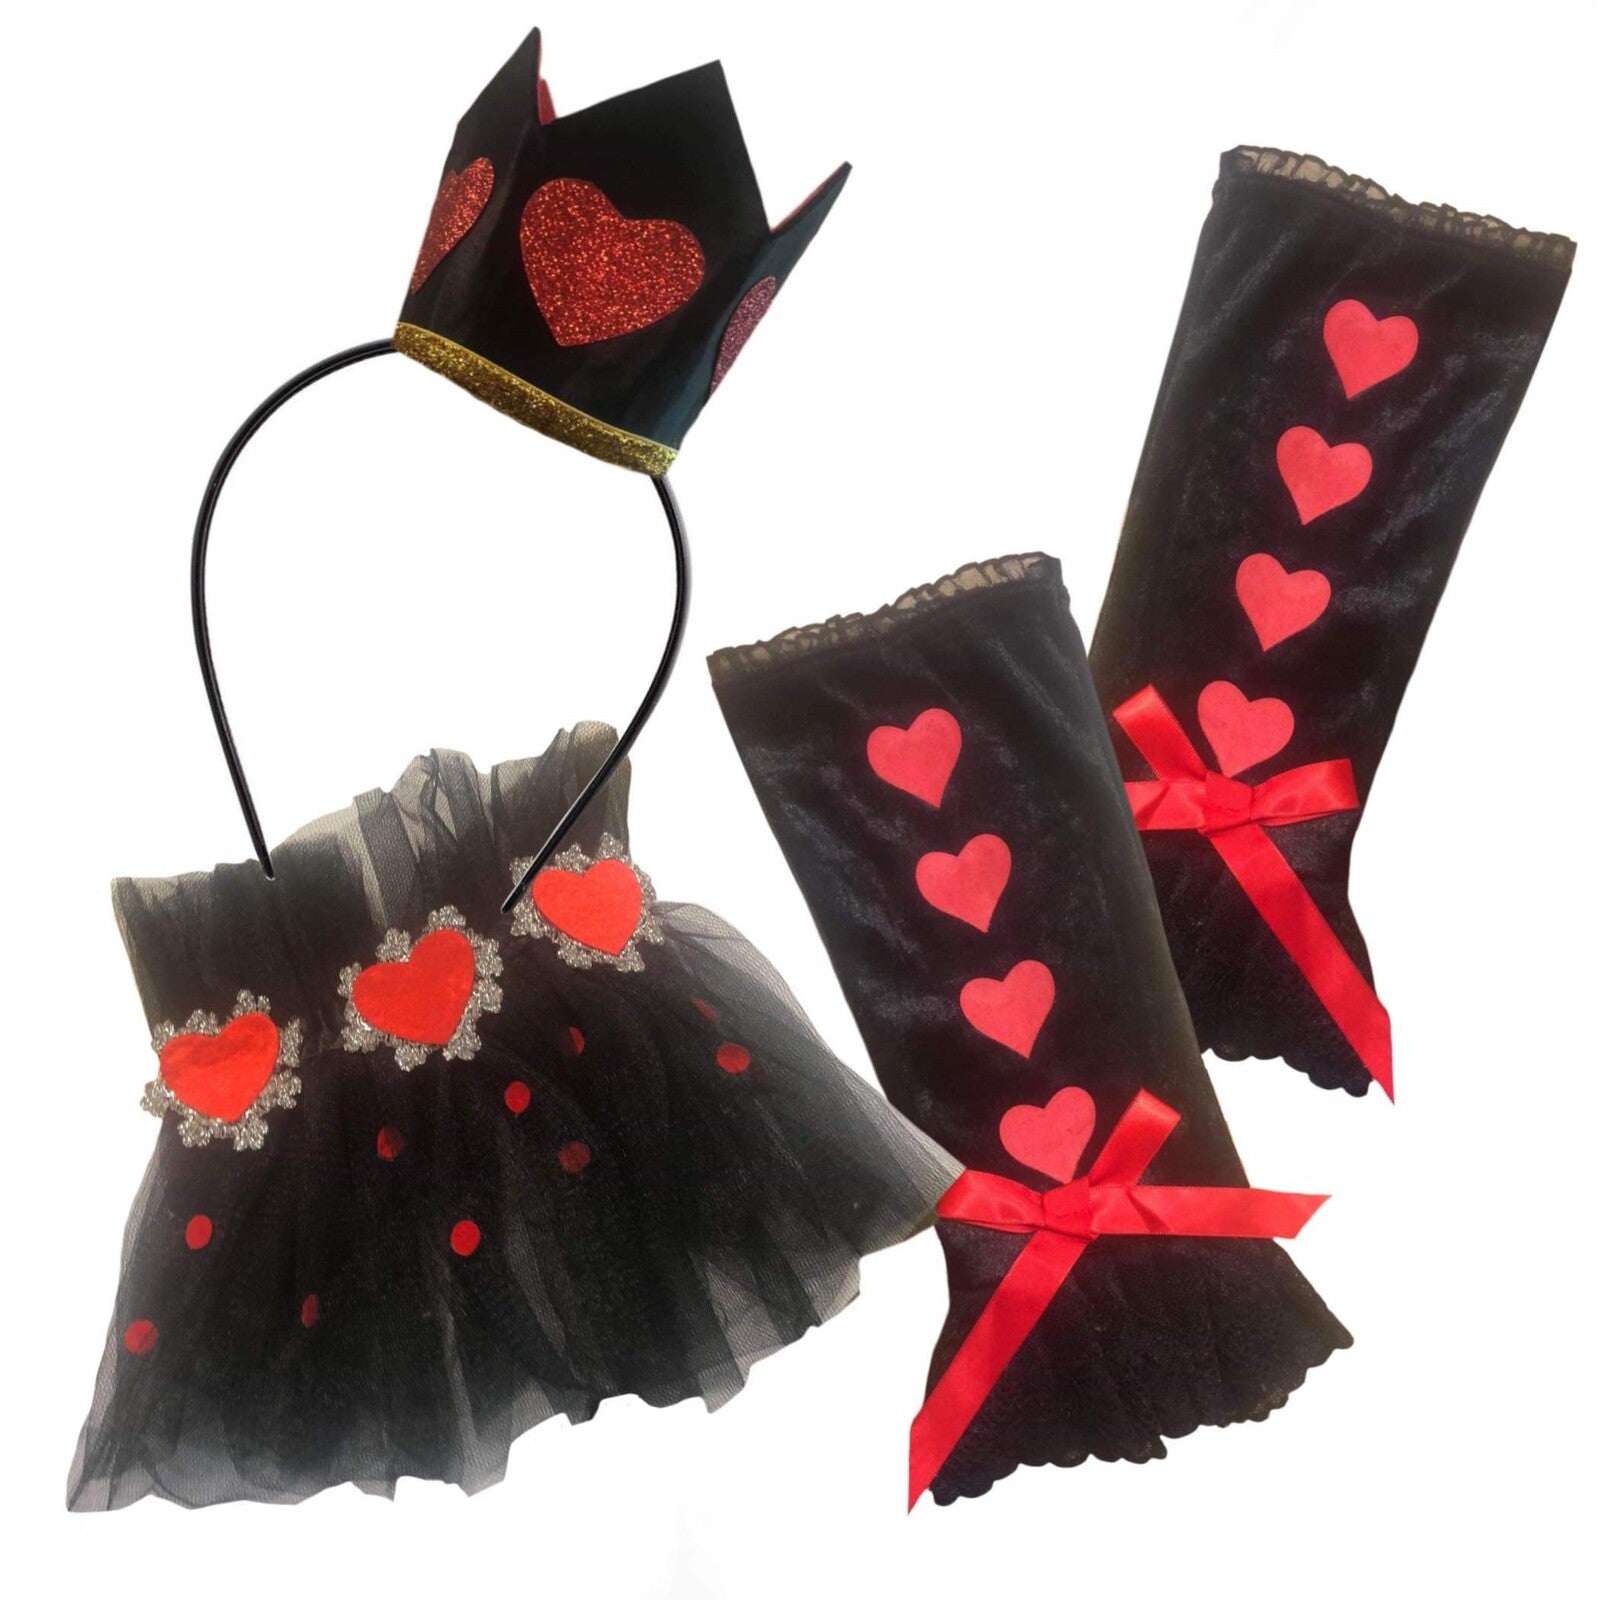 Queen of Hearts accessory set 